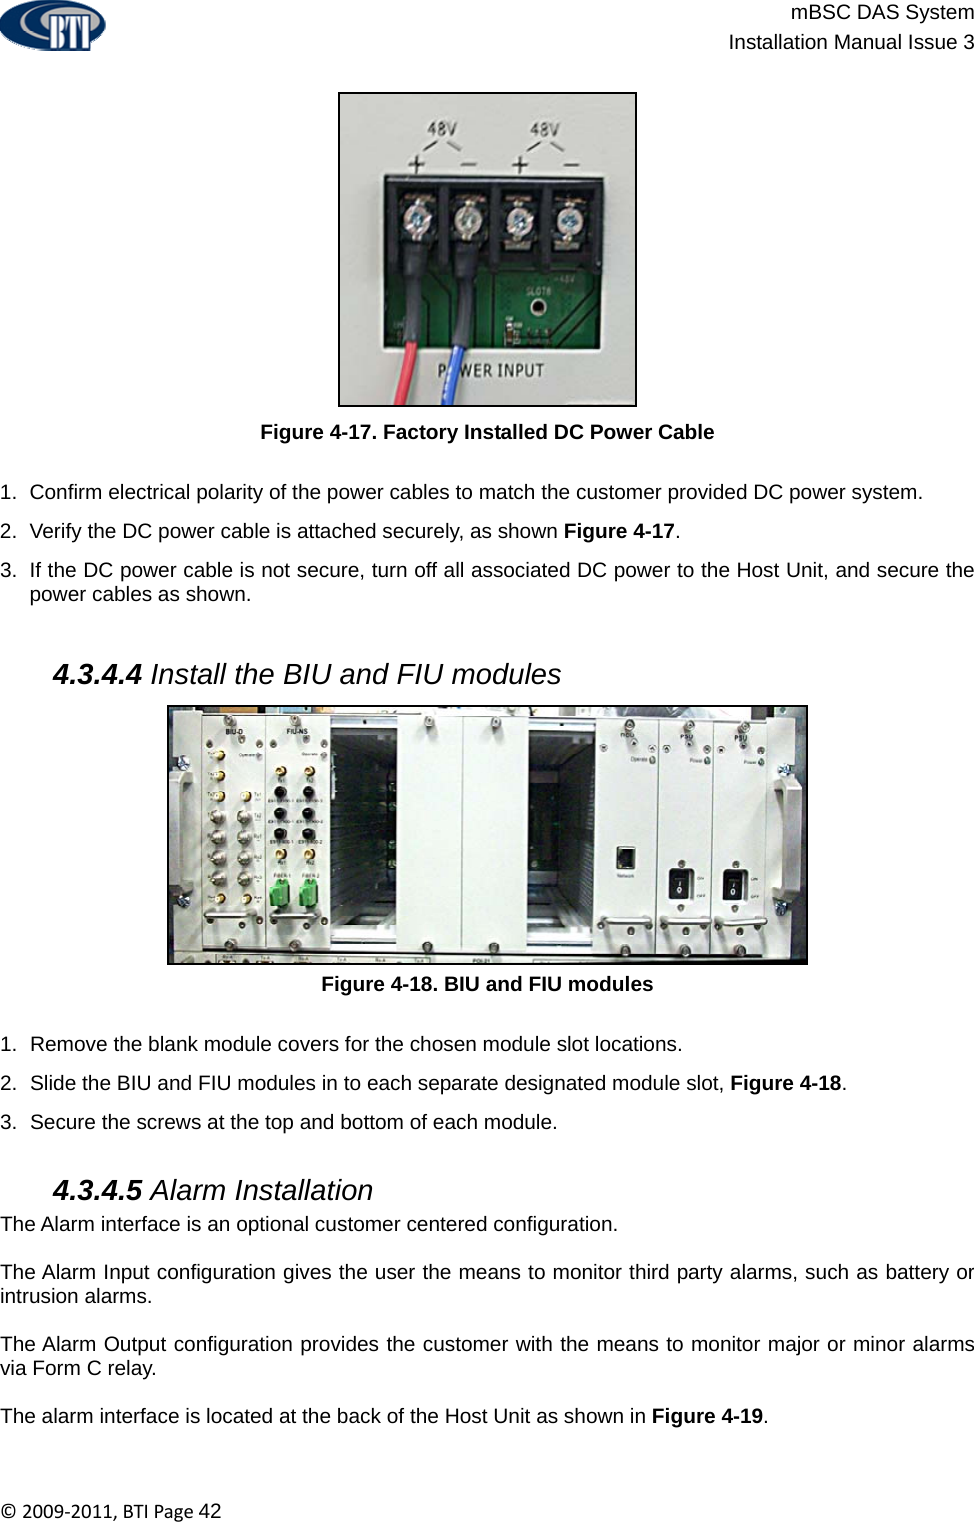                          mBSC DAS System  Installation Manual Issue 3  ©2009‐2011,BTIPage42  Figure 4-17. Factory Installed DC Power Cable  1.  Confirm electrical polarity of the power cables to match the customer provided DC power system. 2.  Verify the DC power cable is attached securely, as shown Figure 4-17. 3.  If the DC power cable is not secure, turn off all associated DC power to the Host Unit, and secure the power cables as shown.   4.3.4.4 Install the BIU and FIU modules Figure 4-18. BIU and FIU modules  1.  Remove the blank module covers for the chosen module slot locations. 2.  Slide the BIU and FIU modules in to each separate designated module slot, Figure 4-18. 3.  Secure the screws at the top and bottom of each module.   4.3.4.5 Alarm Installation The Alarm interface is an optional customer centered configuration.   The Alarm Input configuration gives the user the means to monitor third party alarms, such as battery or intrusion alarms.  The Alarm Output configuration provides the customer with the means to monitor major or minor alarms via Form C relay.  The alarm interface is located at the back of the Host Unit as shown in Figure 4-19. 